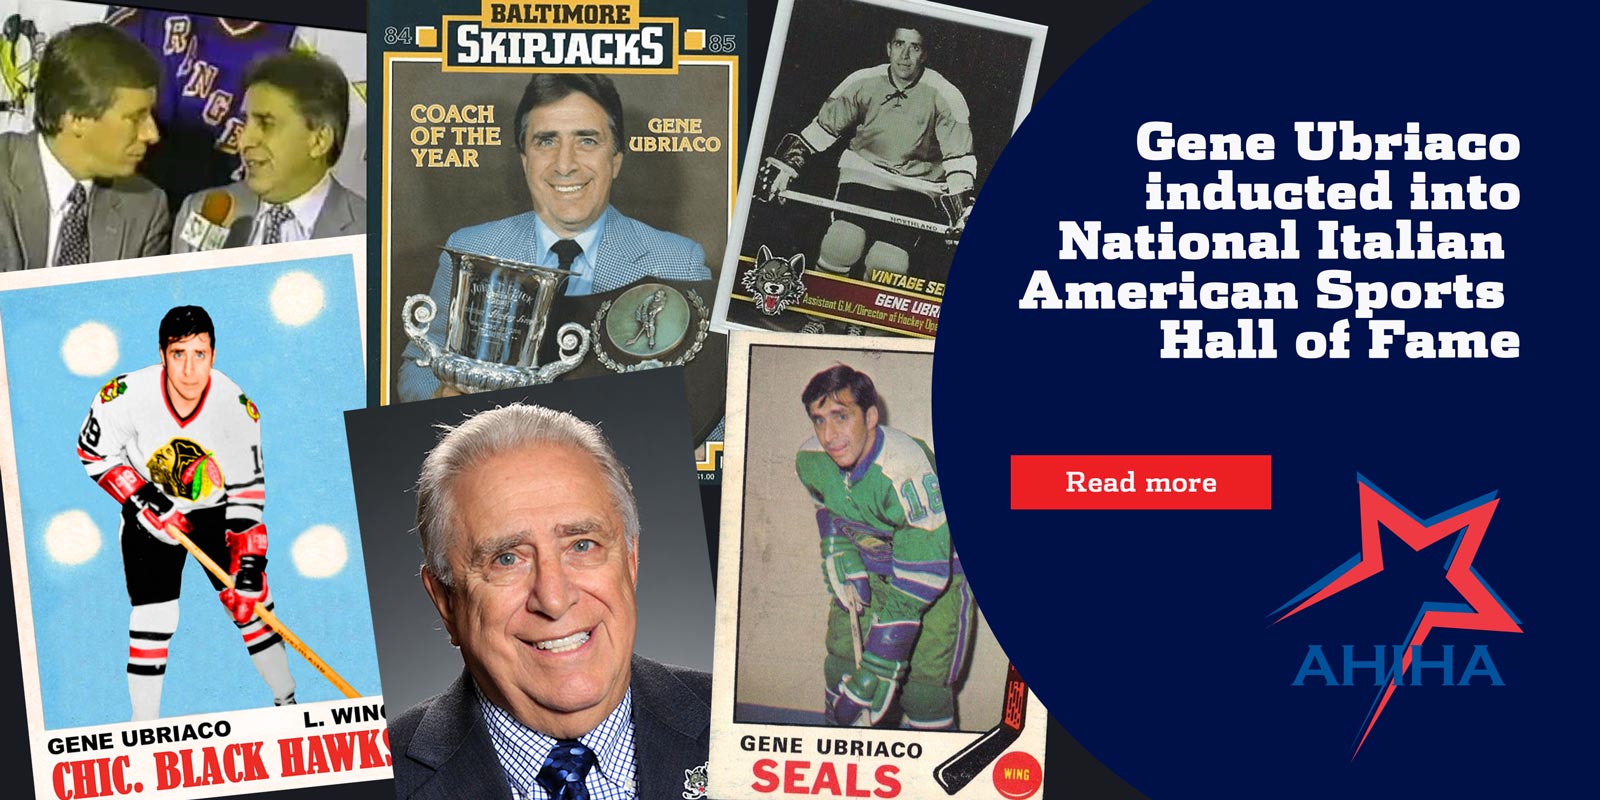 Gene Ubriaco inducted into National Italian American Sports Hall of Fame